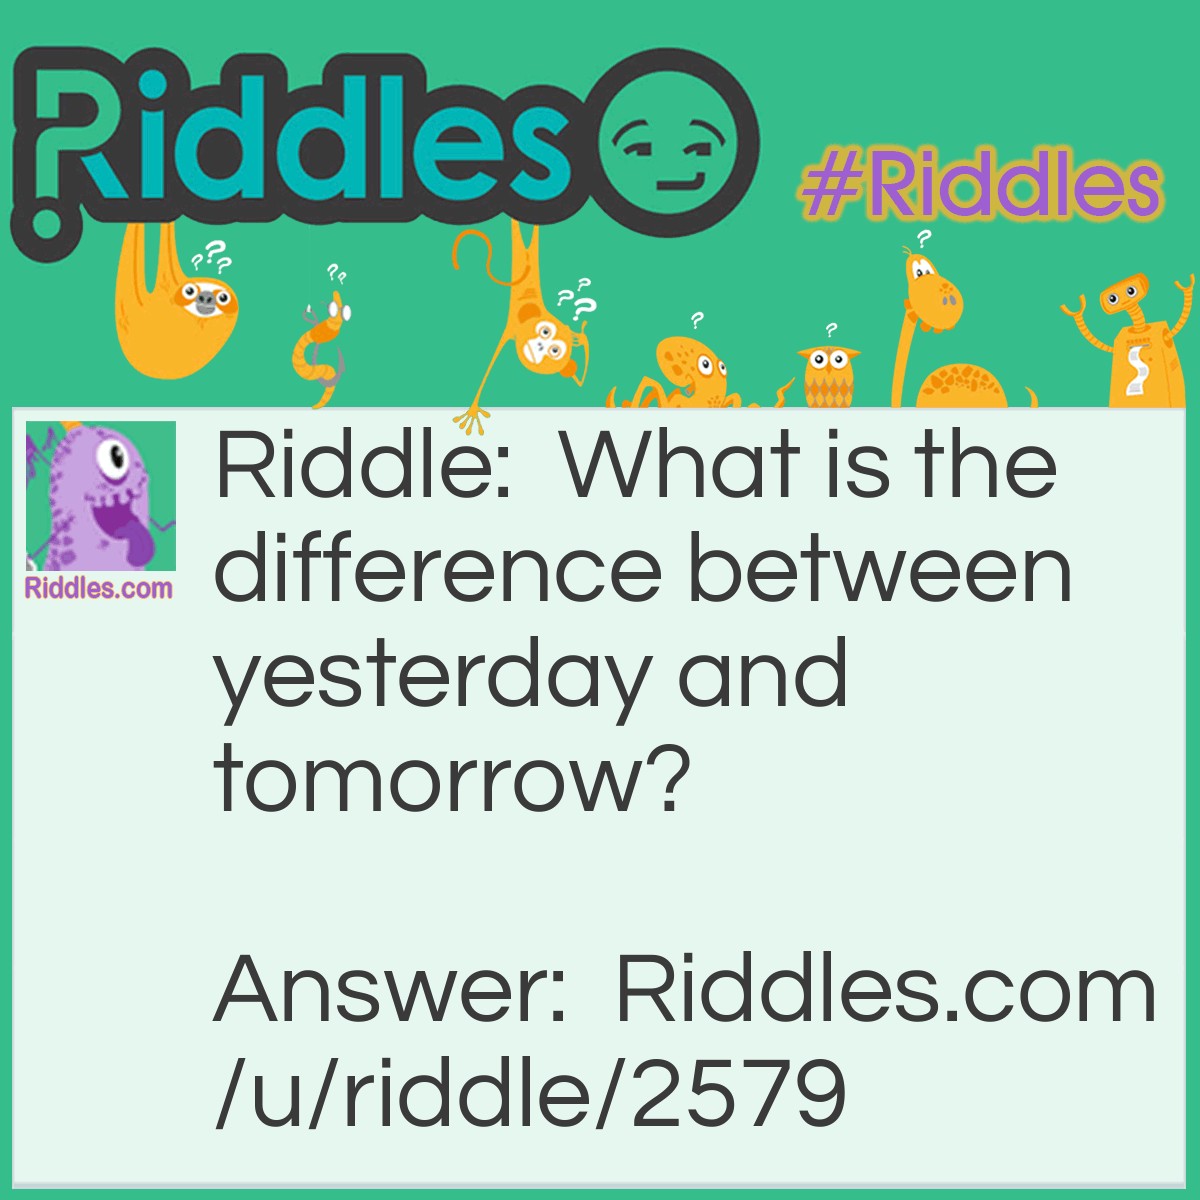 Riddle: What is the difference between yesterday and tomorrow? Answer: Today.